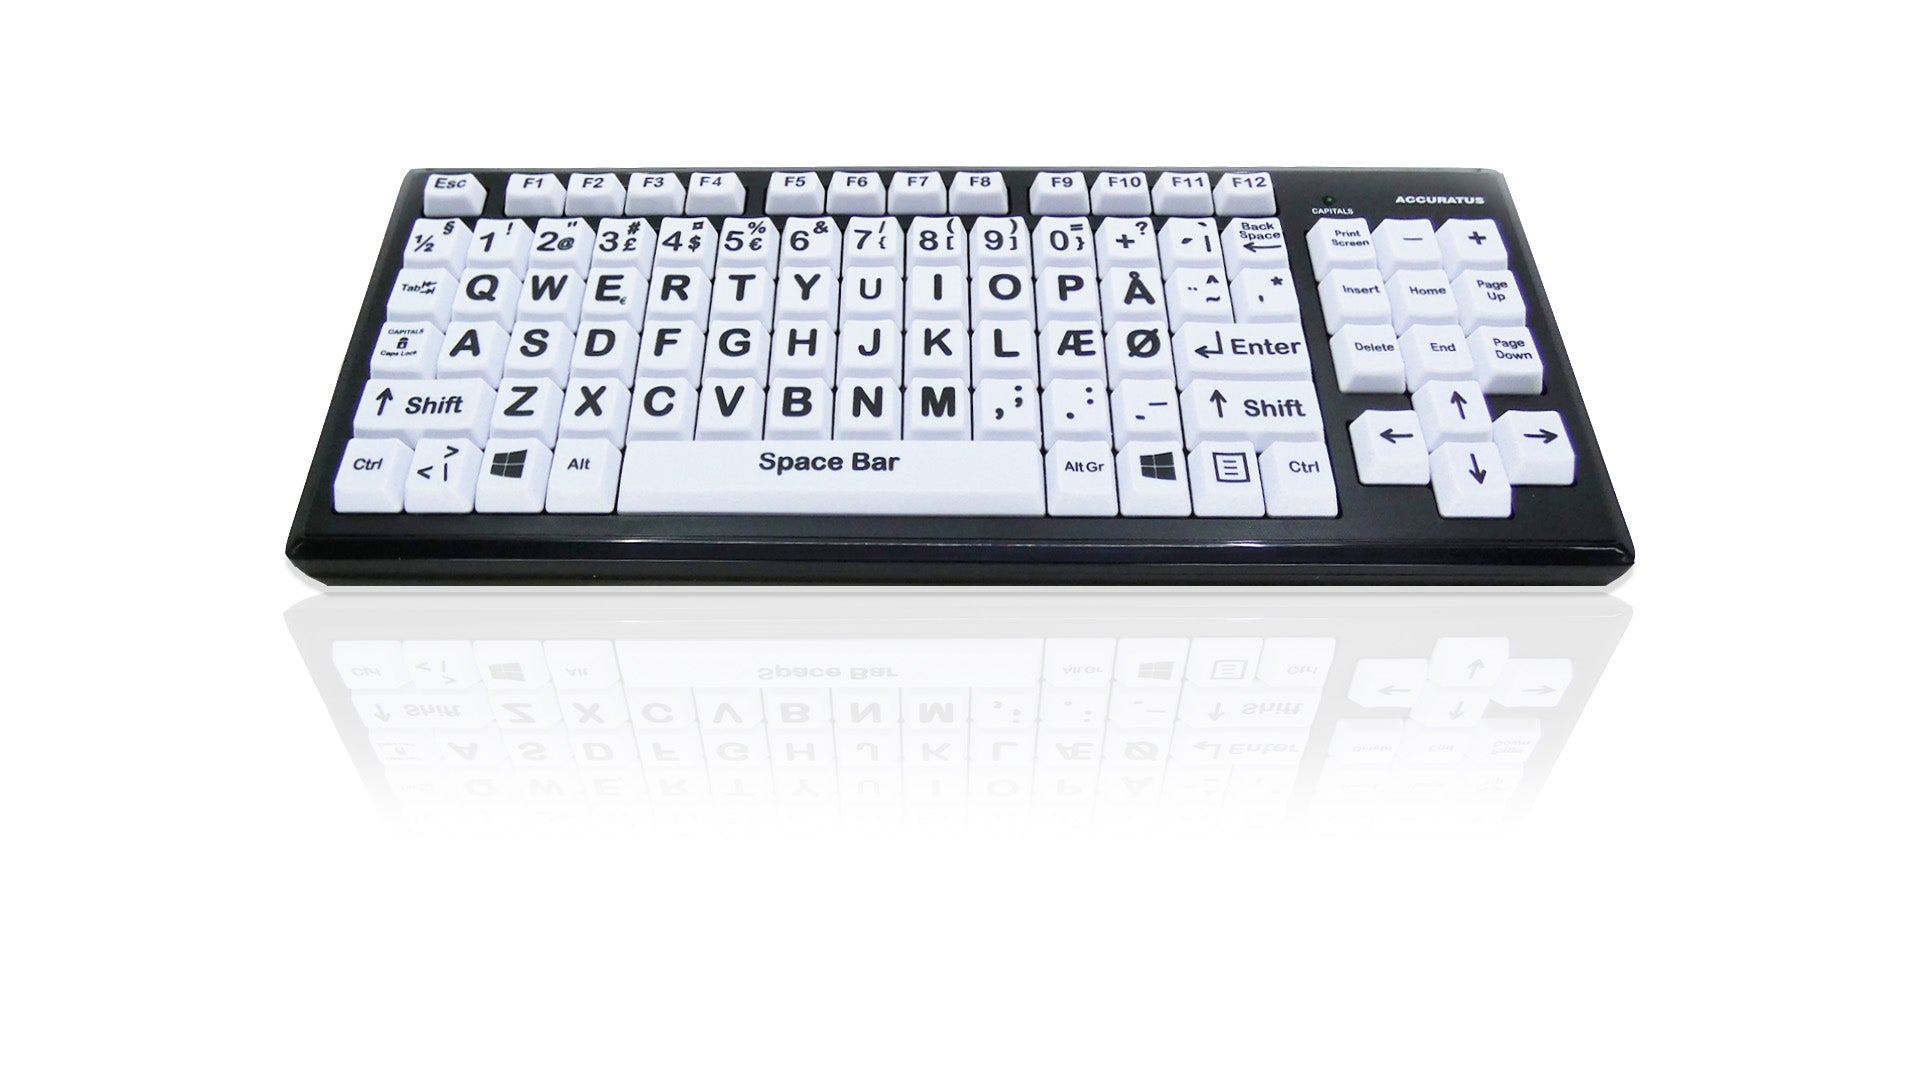 Accuratus Monster 2 - USB High Contrast Vision Impairment Keyboard with Extra Large Keys & 2 Port USB Hub